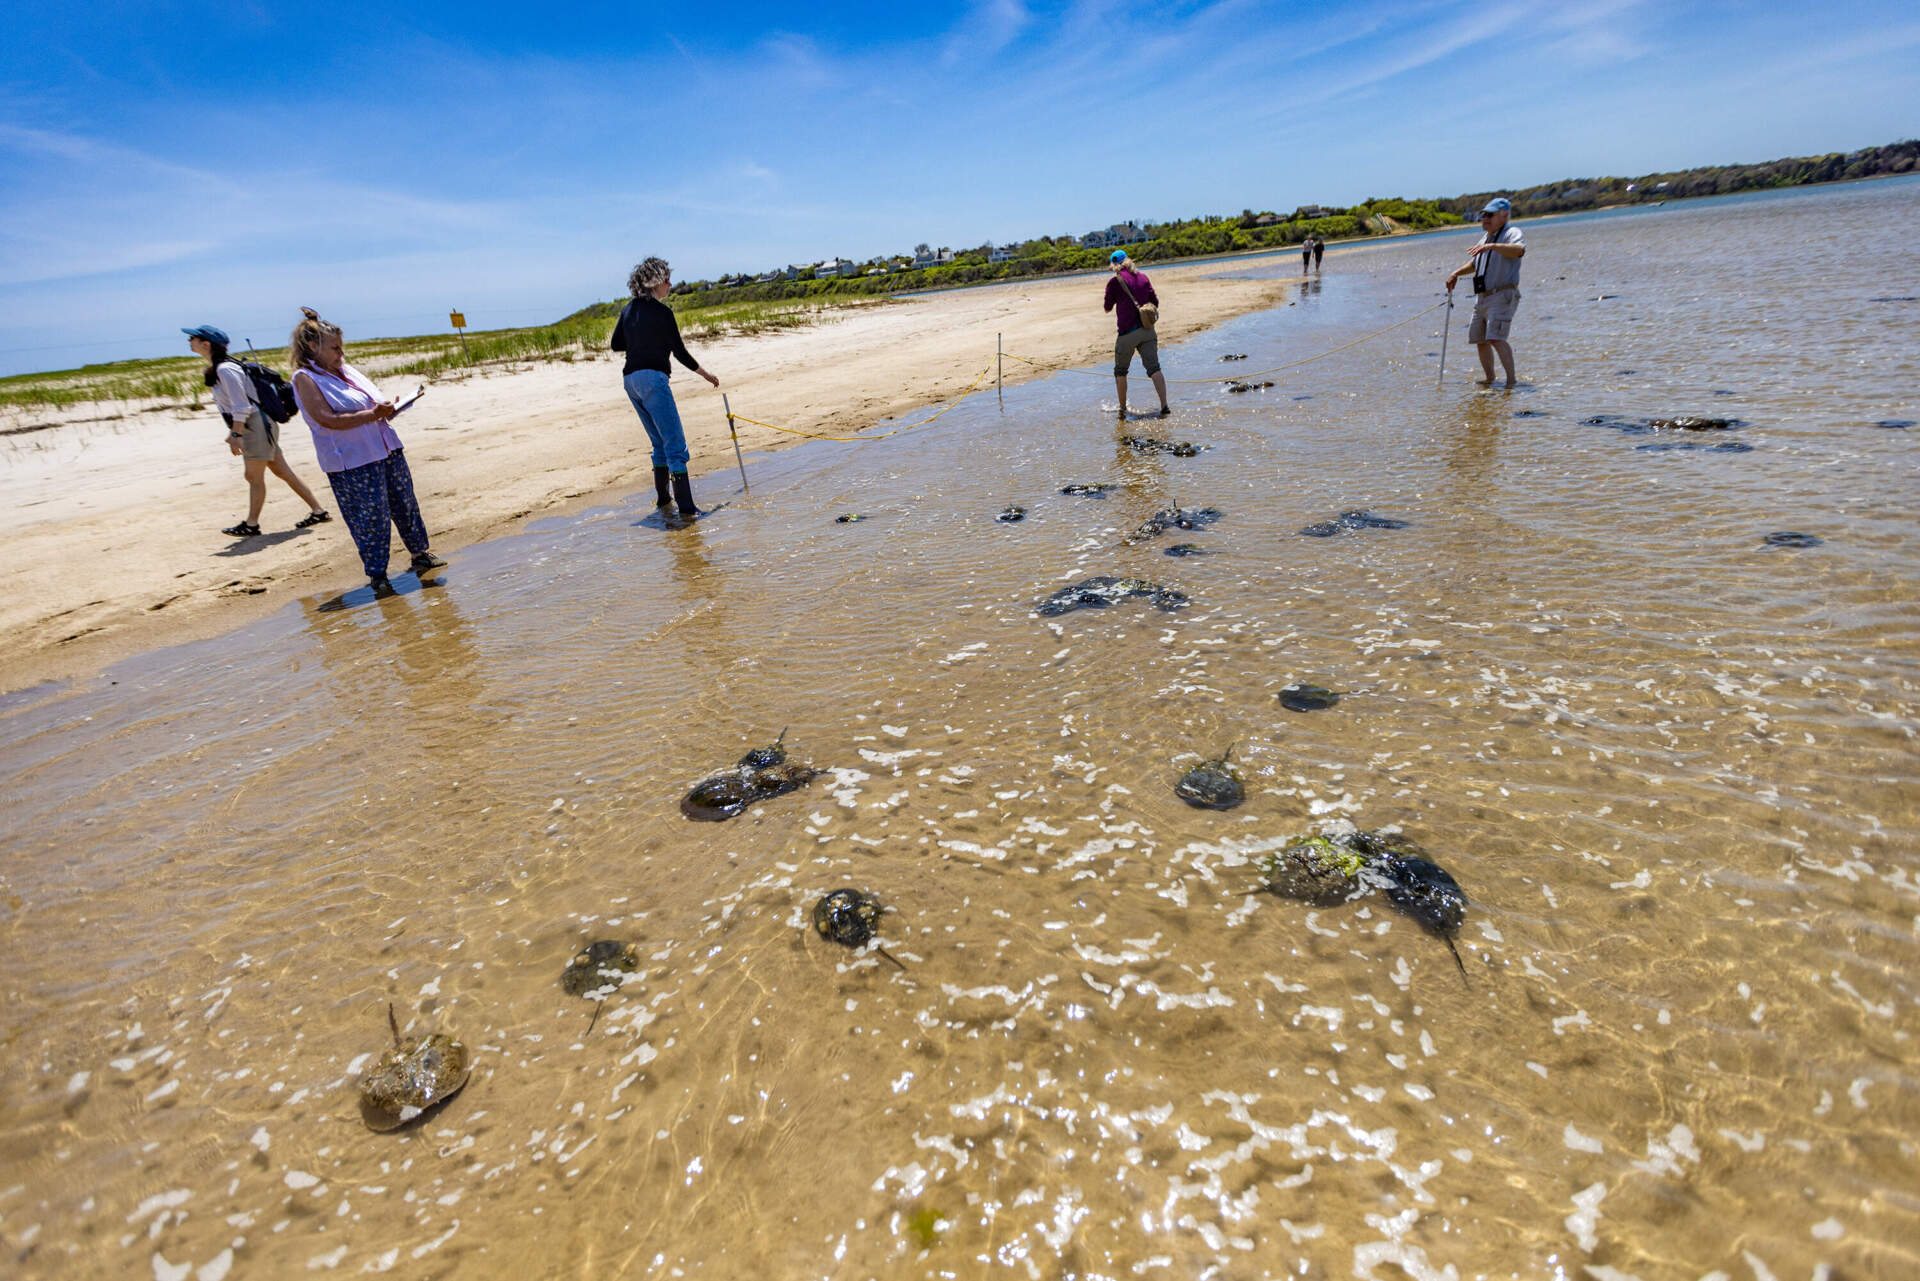 The team from Mass Audubon marks areas for the count using sticks and ropes. The volunteers work their way around the beach, surveying the number of horseshoe crabs as they come to the shallow water to breed. (Jesse Costa/WBUR)